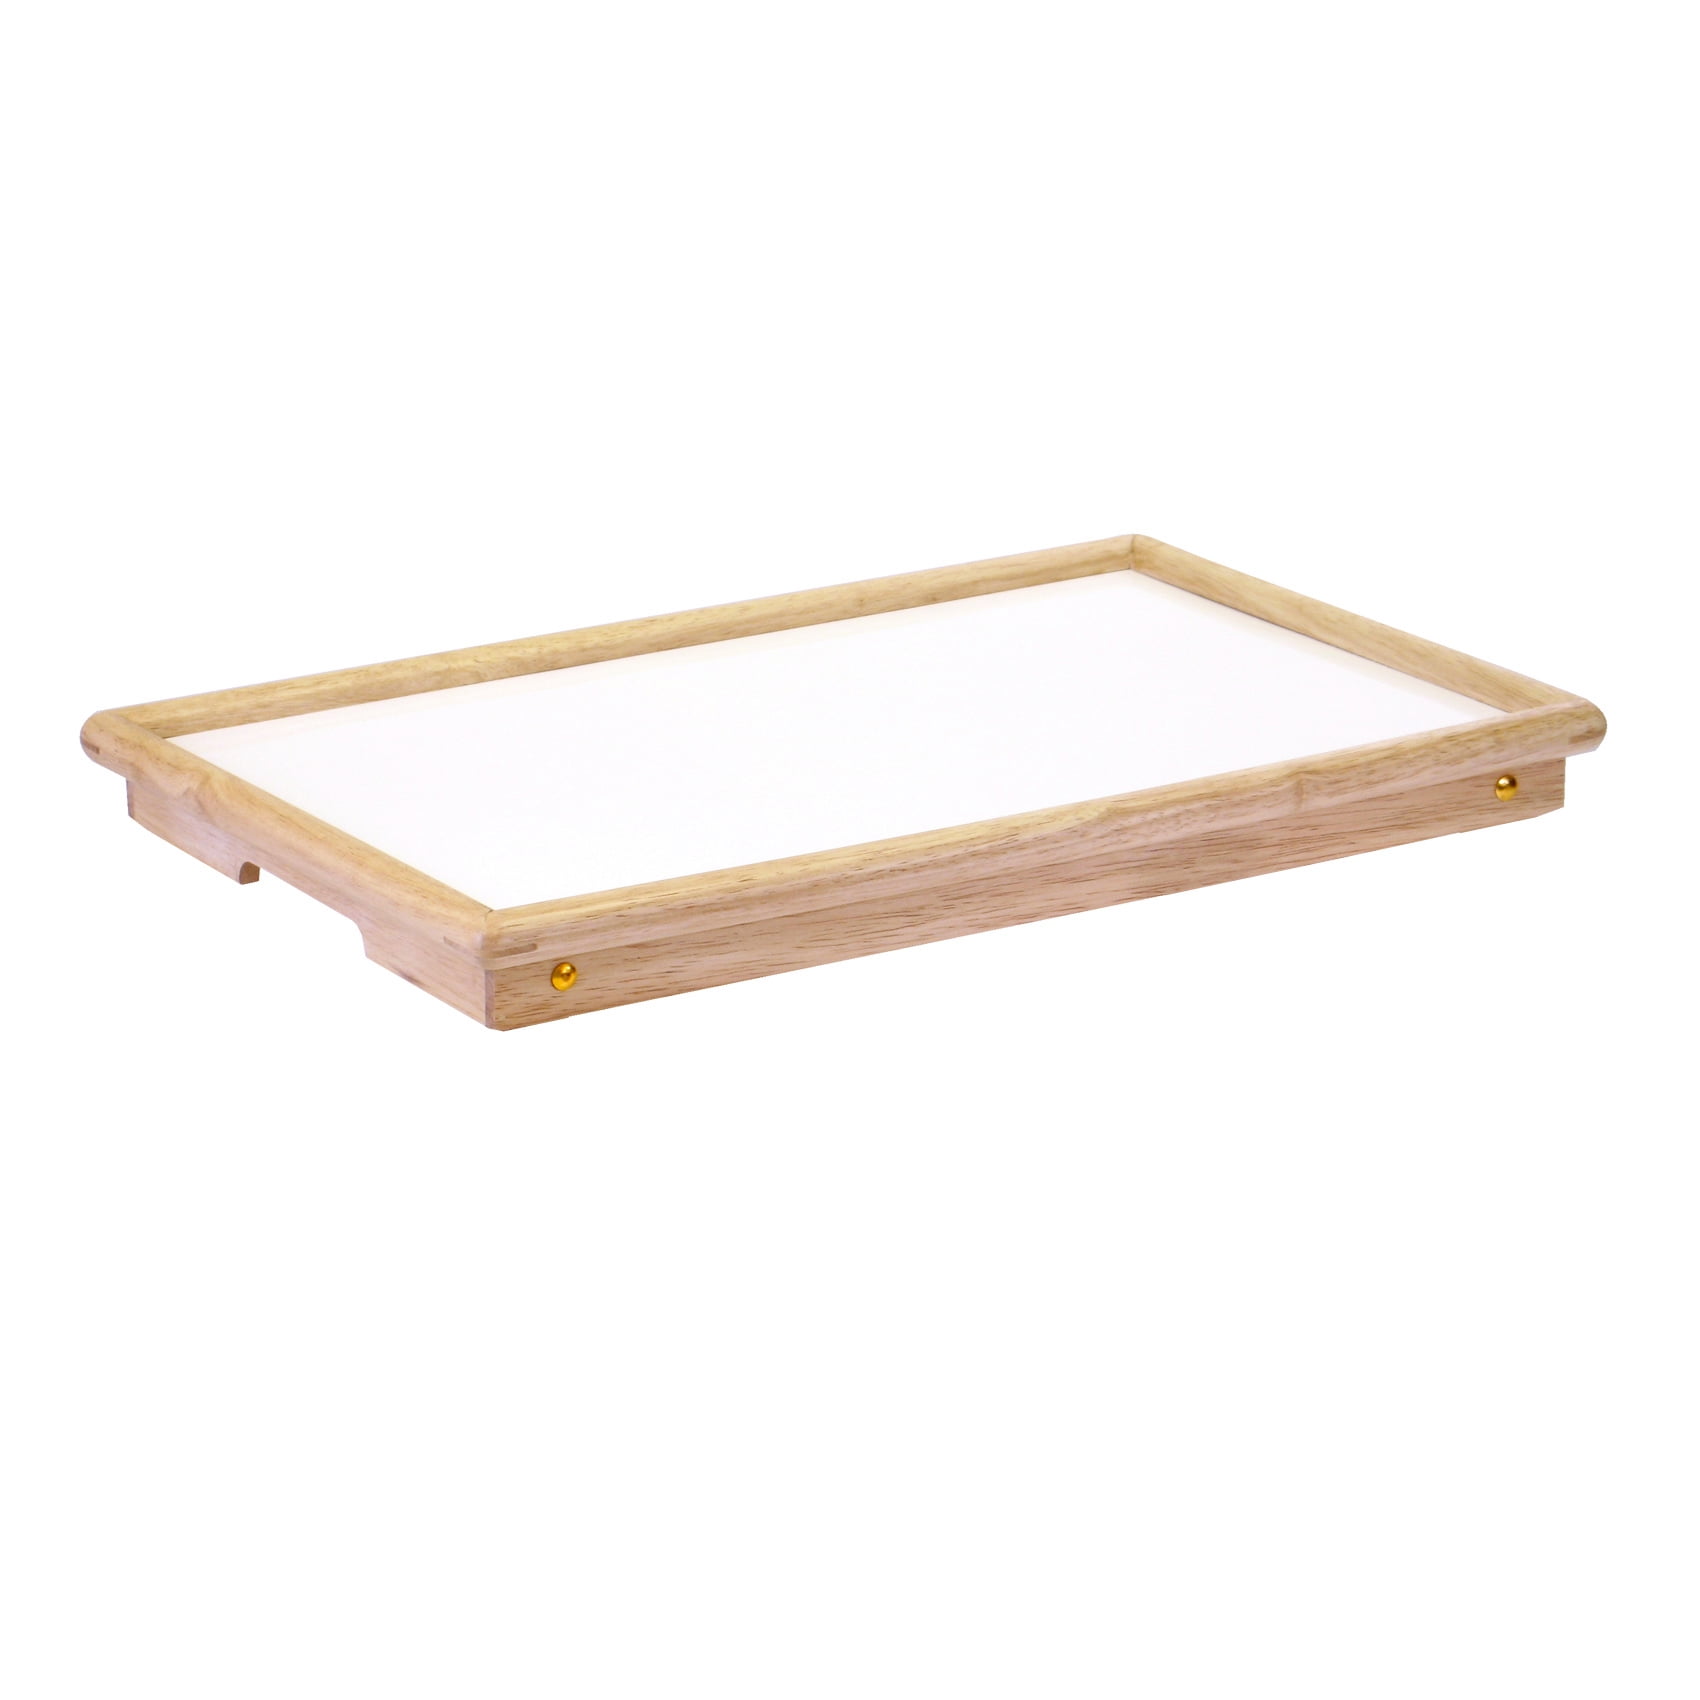 Winsome Wood Ventura Breakfast Bed Tray, Flip-Top, Natural & White 